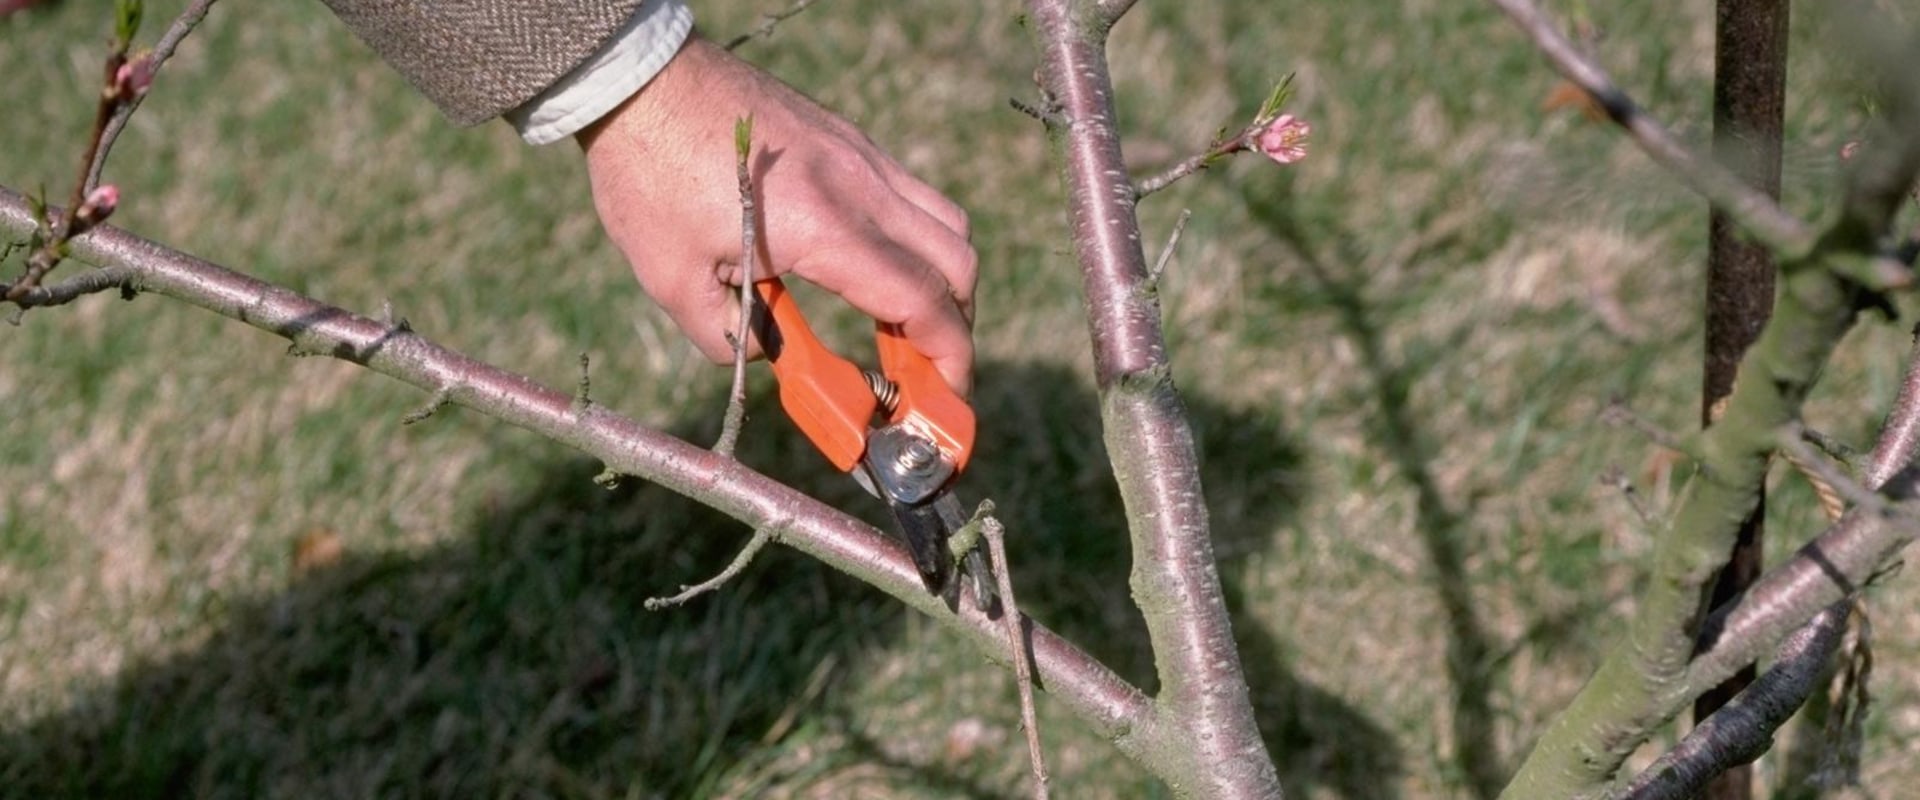 Pruning Newly Planted Trees for Landscaping: A Guide for Beginners